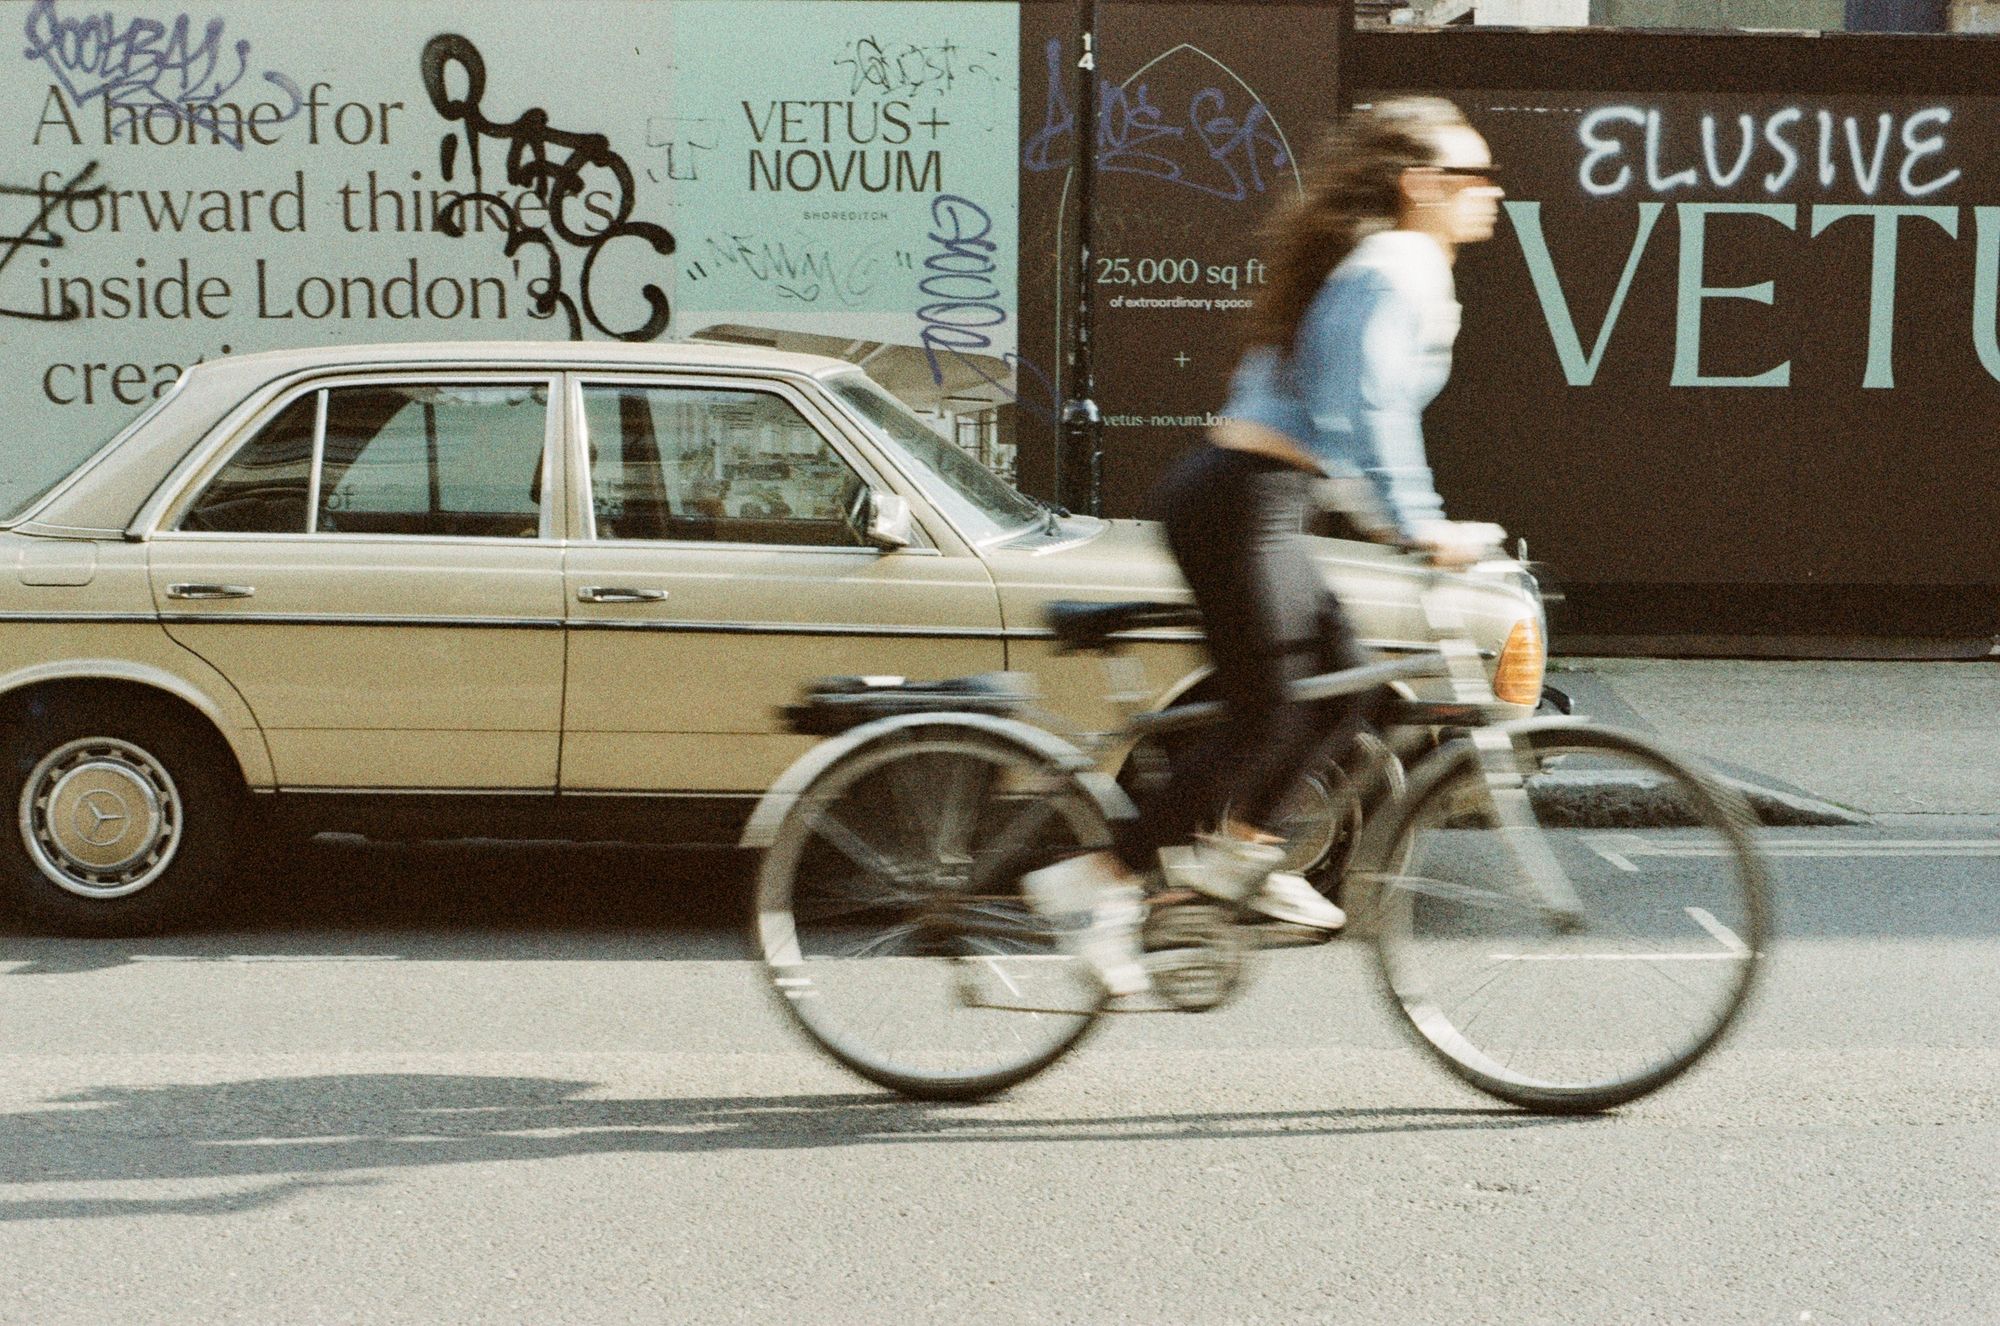 A woman in a blue top and black trousers with long, curly dark hair and sunglasses rides her bike past an old ochre/champagne coloured Mercedes parked next to some hoardings covered in graffiti. The colours are greyish and khaki with some strong contrast, and some colour coming from the woman’s top and the car’s indicator lenses.